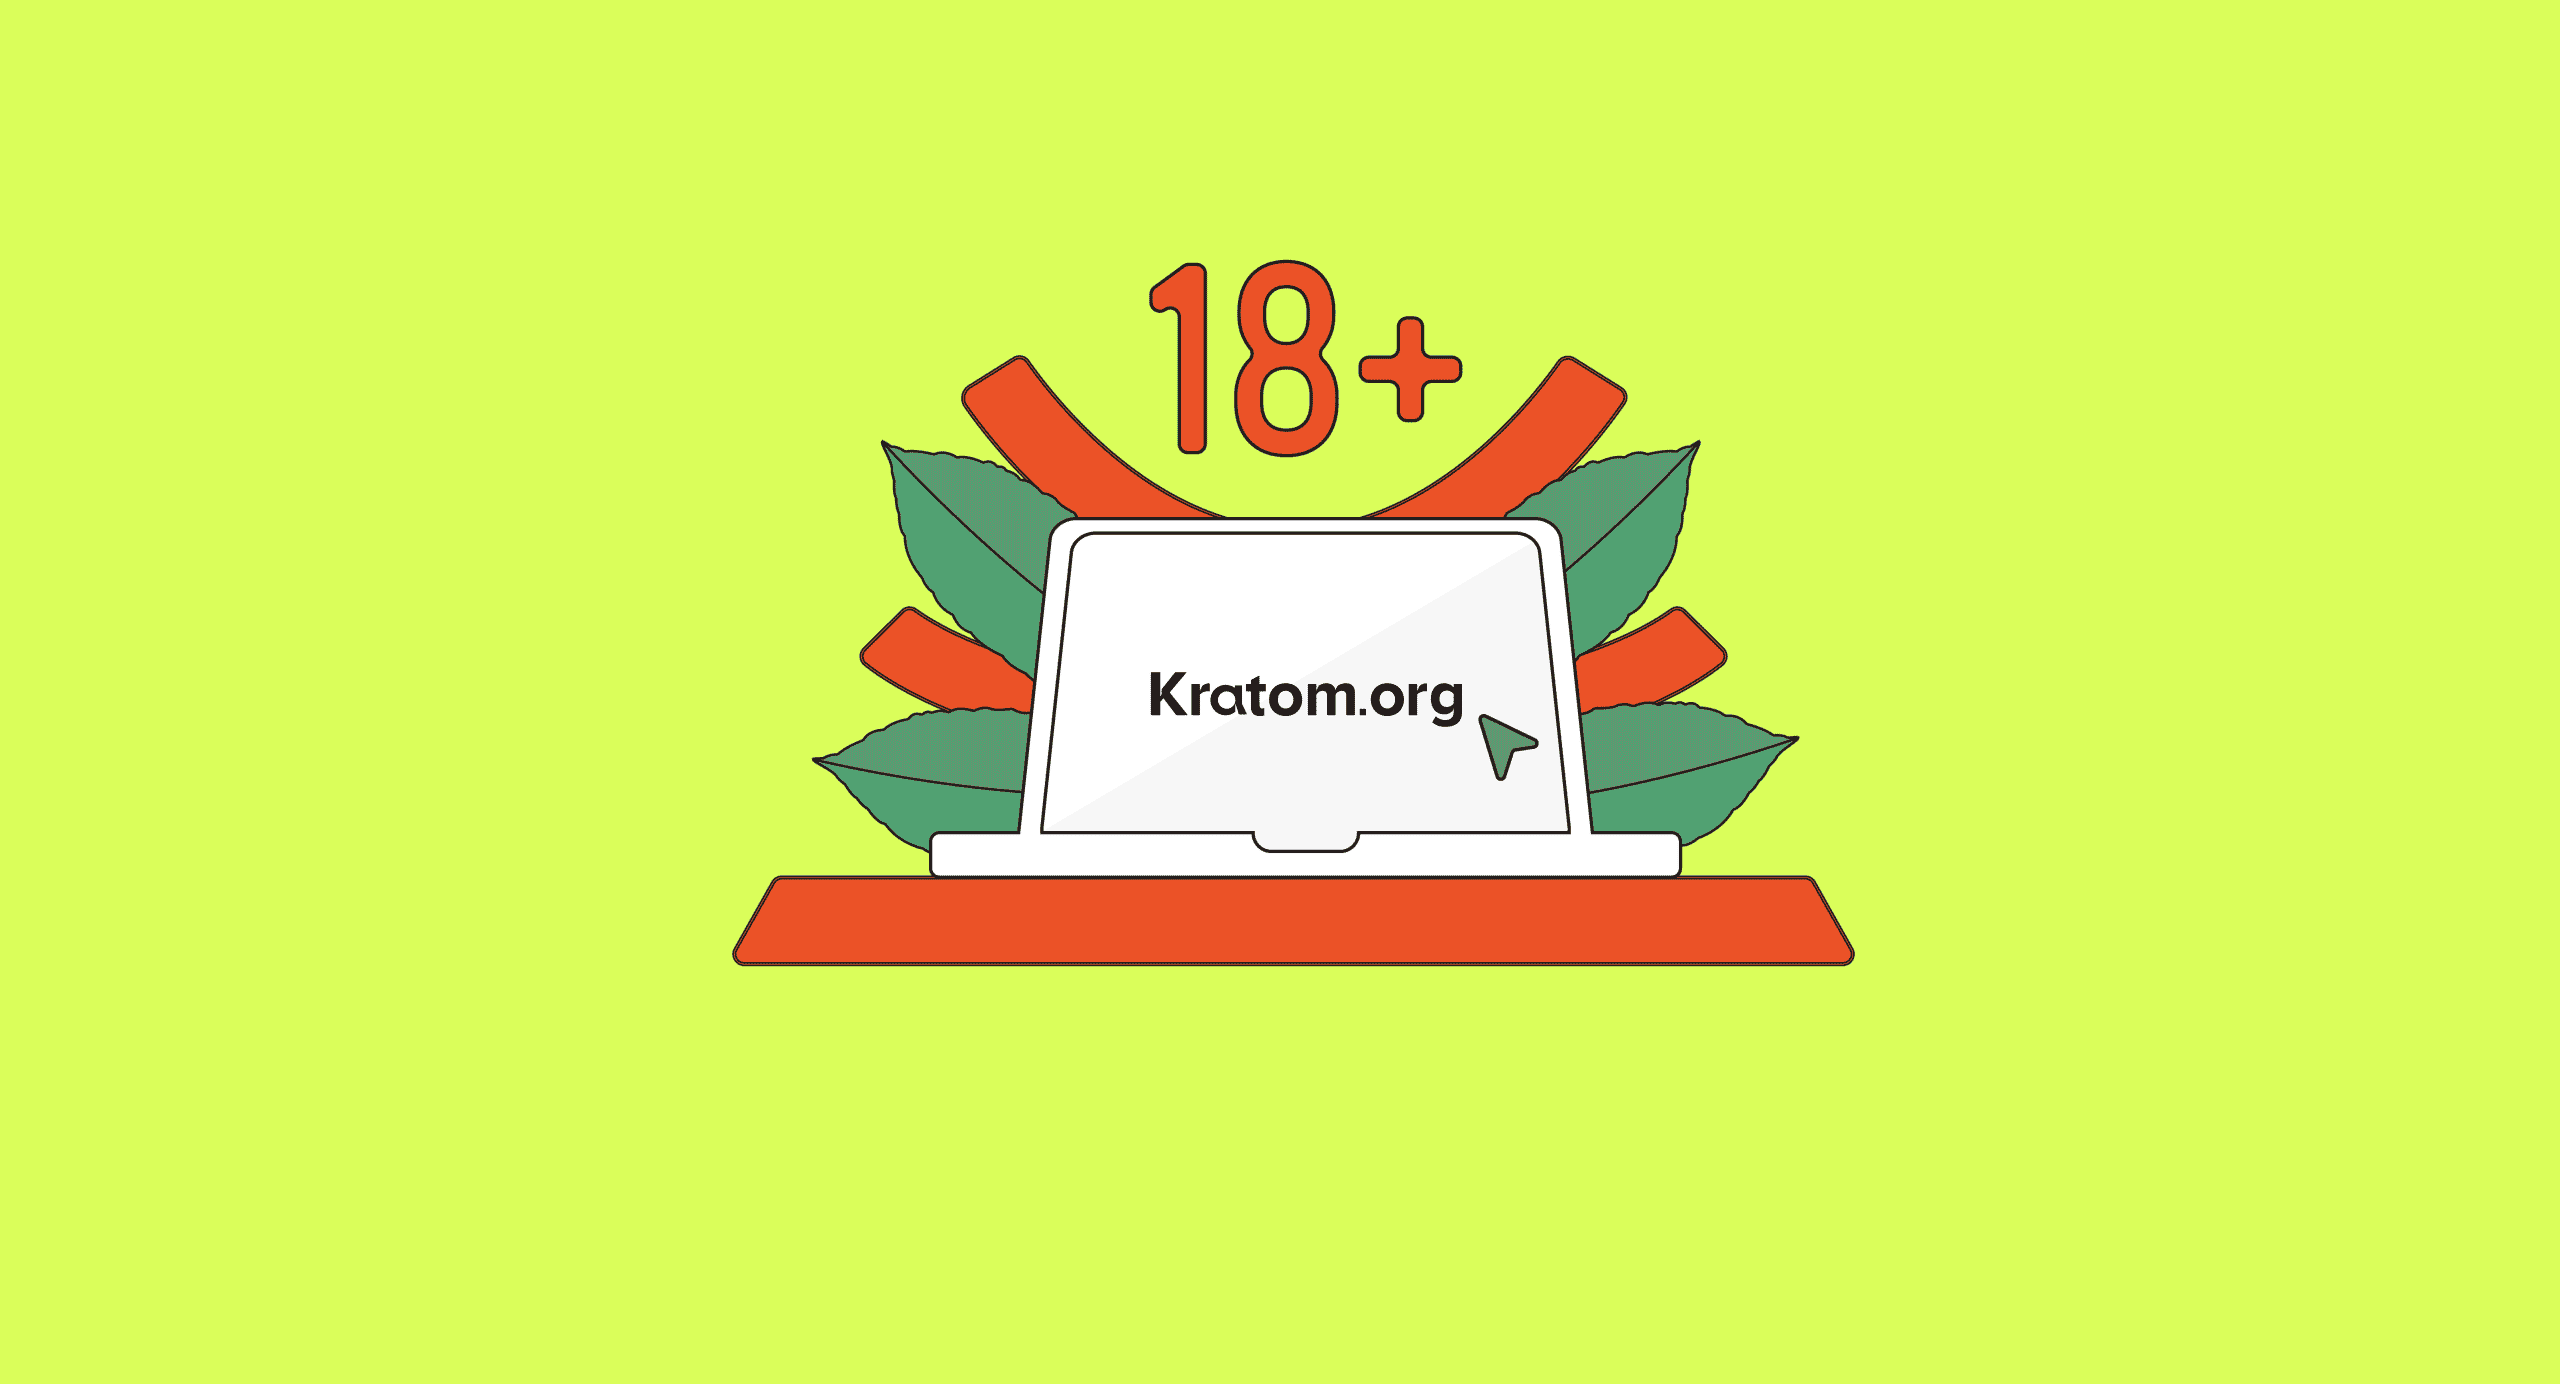 How Old Do You Have to Be to Buy Kratom?